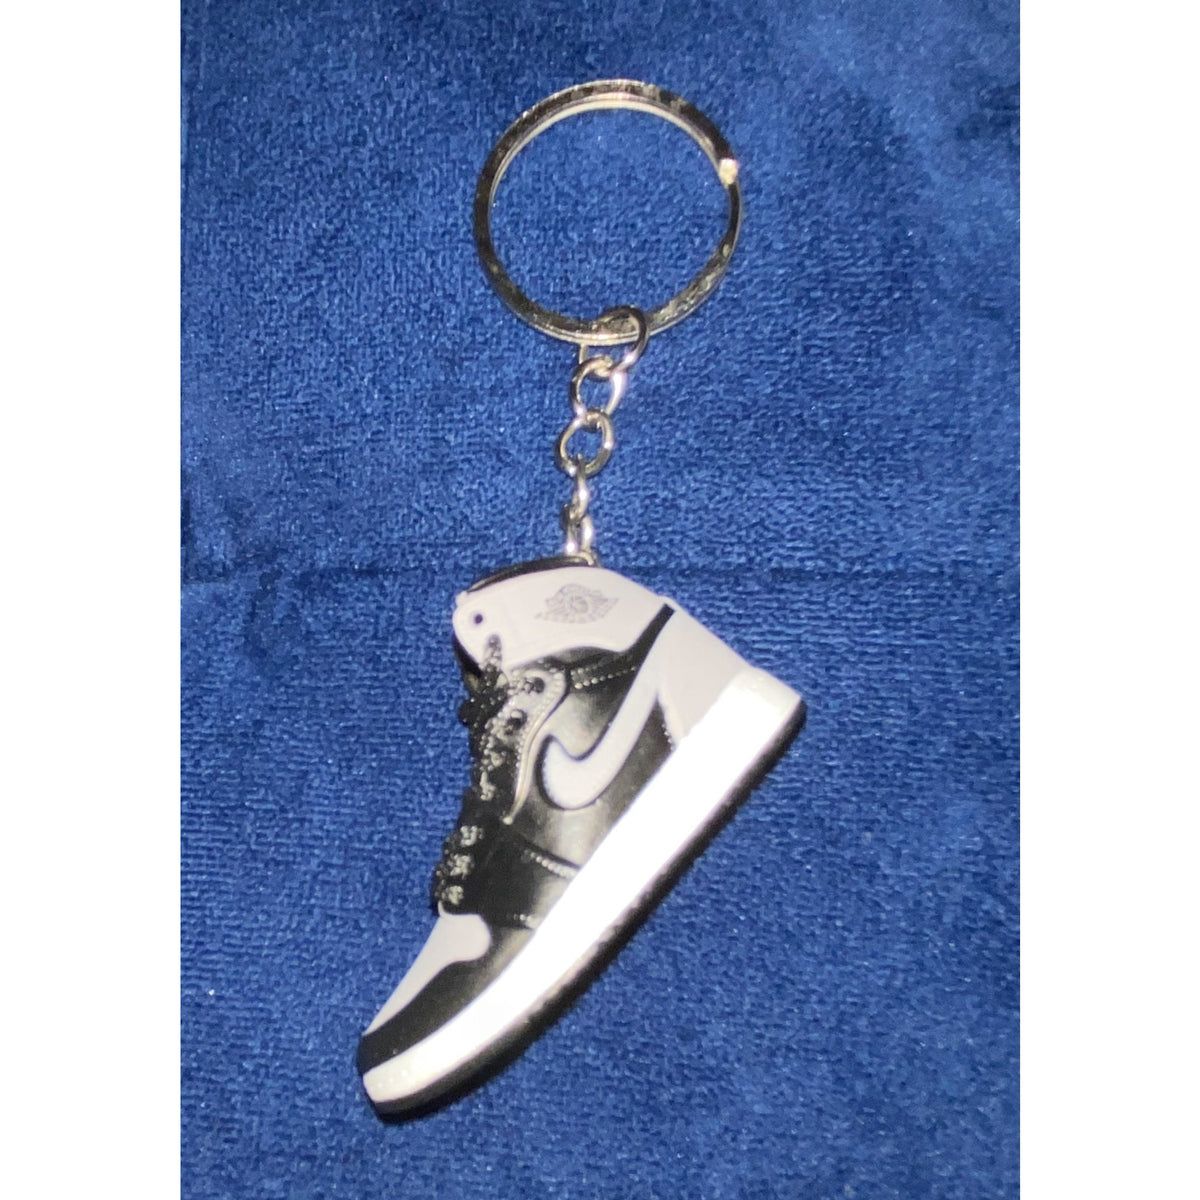 SNEAKER KEYCHAIN - GRAY - HAUS OF RISS